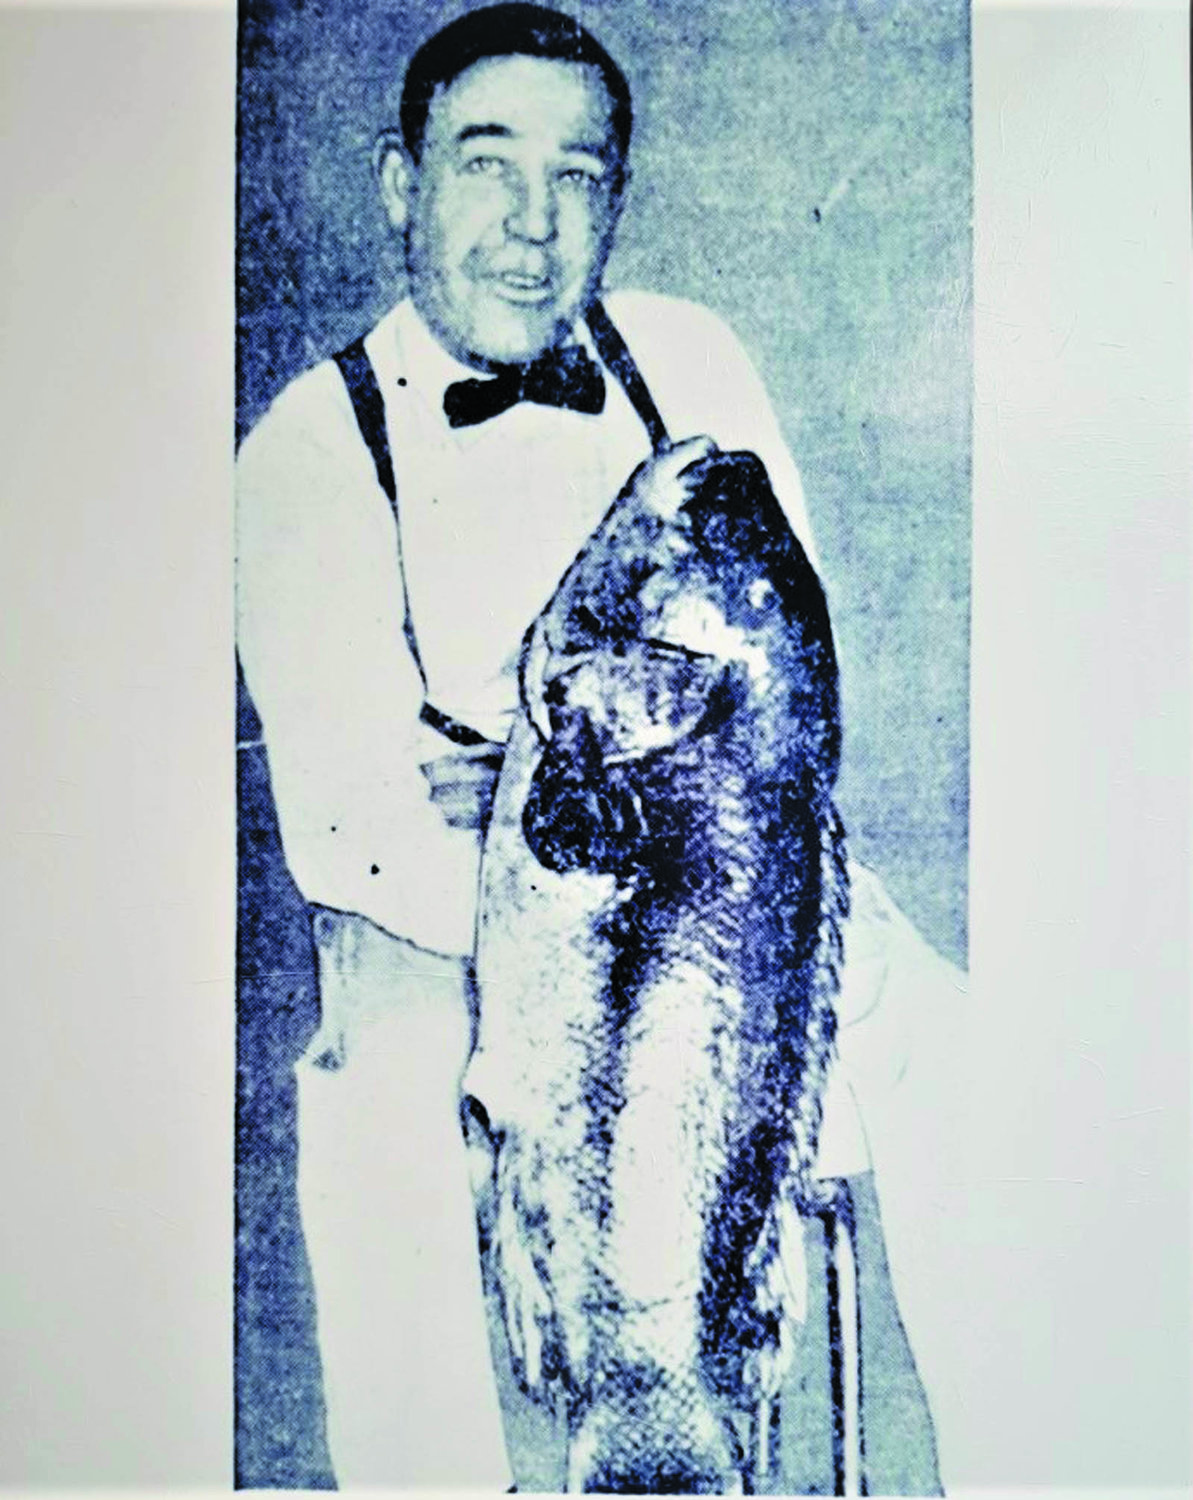 STATE TAUTOG RECORD: Conrad Sundquist of Cranston, RI caught this record tautog, 21 pounds, 4 ounces, off Beavertail. At one point the fish also held the world record for 20 pound test line.